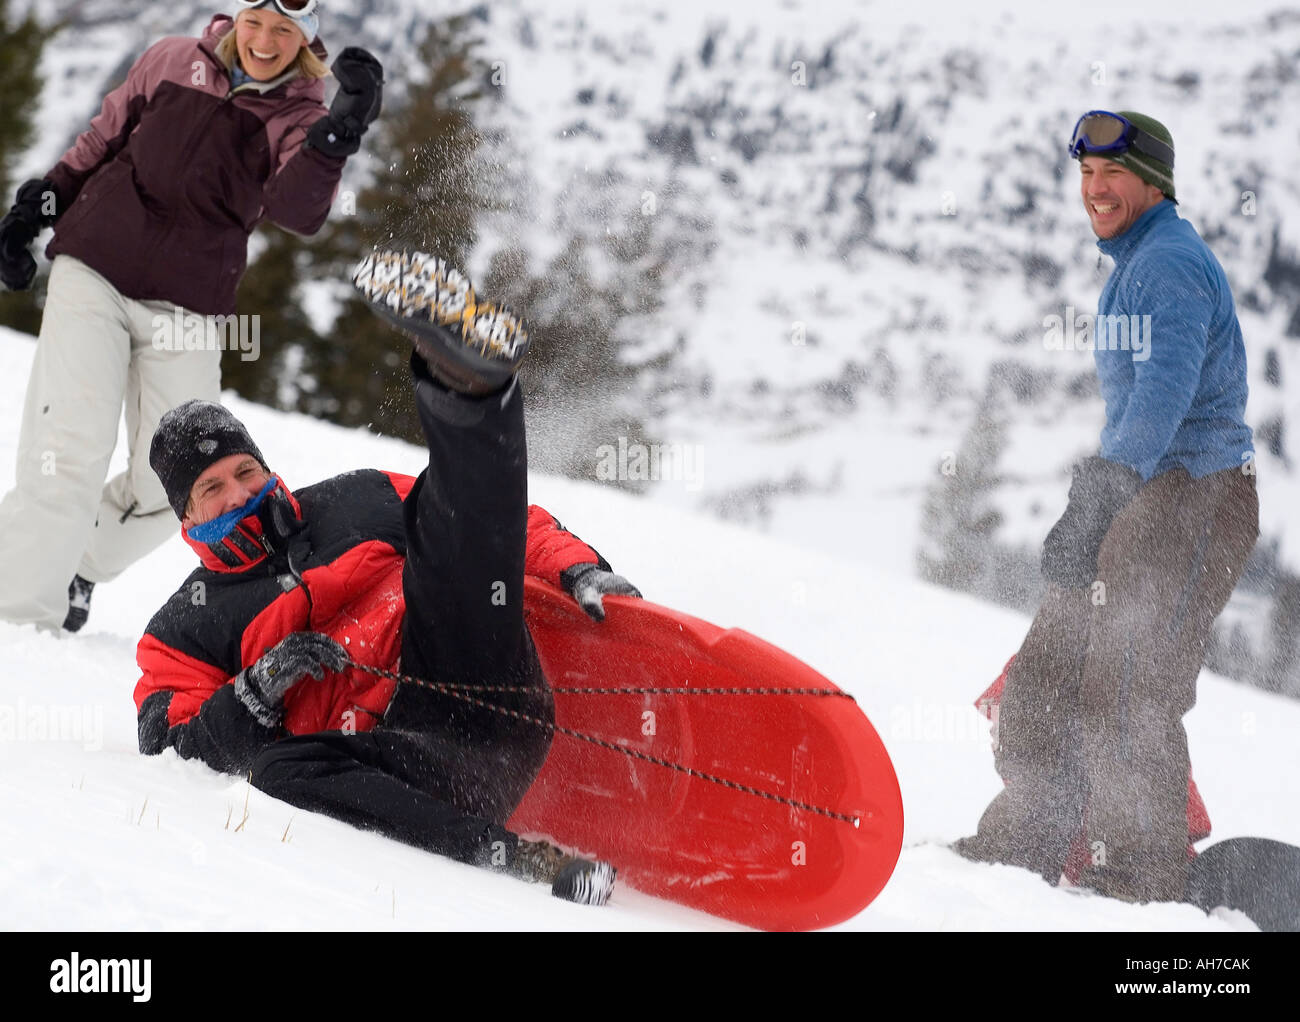 Mid adult man falling from a sled with a mid adult man and mid adult woman watching Stock Photo